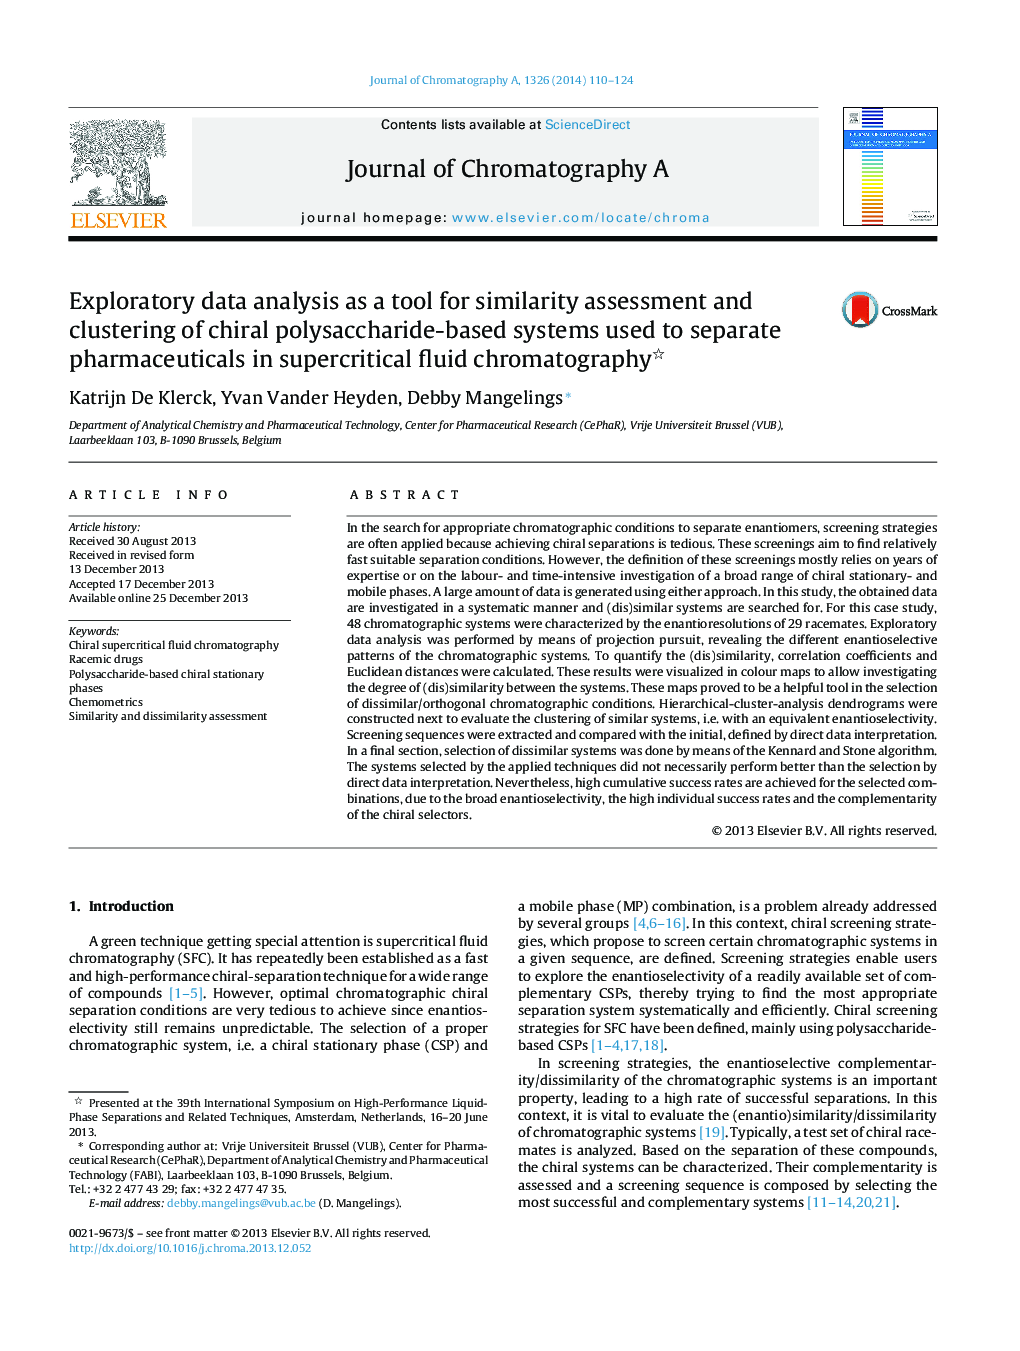 Exploratory data analysis as a tool for similarity assessment and clustering of chiral polysaccharide-based systems used to separate pharmaceuticals in supercritical fluid chromatography 